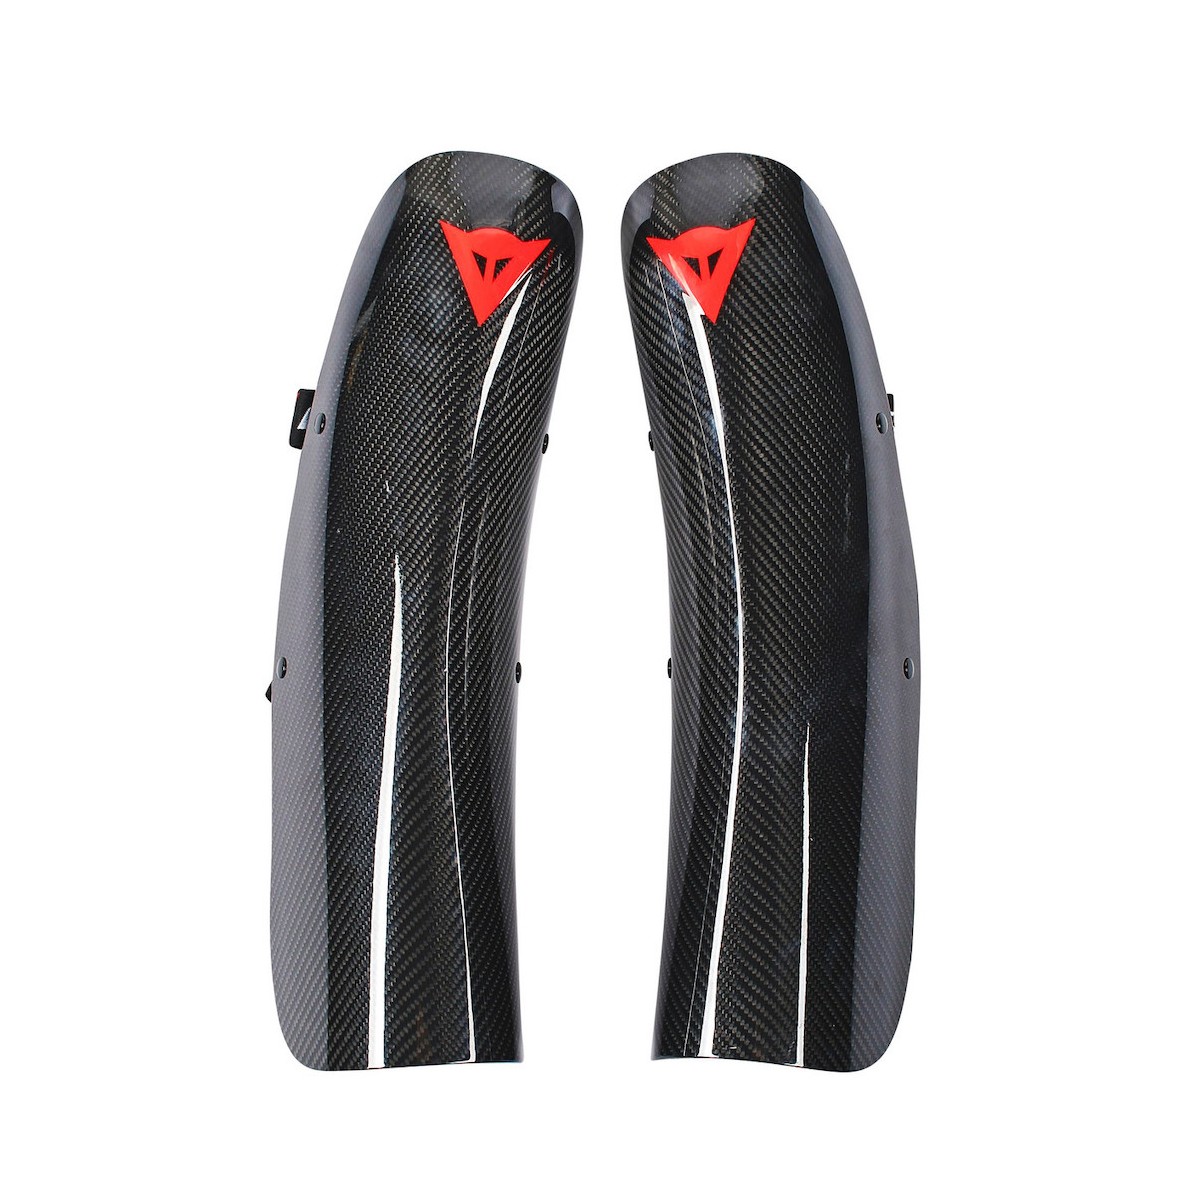 DAINESE WC CARBON shin guards - black